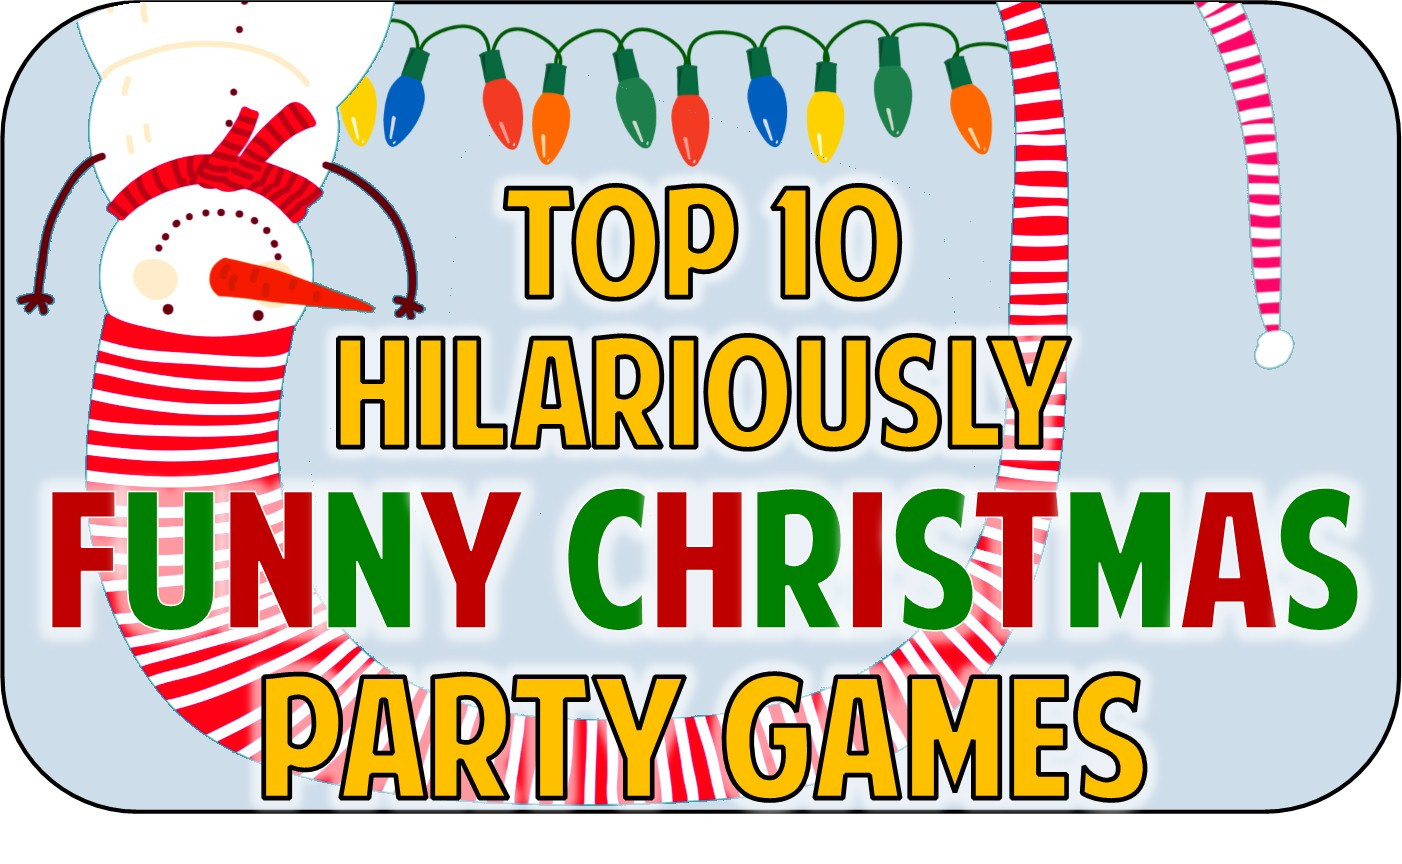 Themed Christmas Party Ideas For Adults
 Christmas Party fice Games